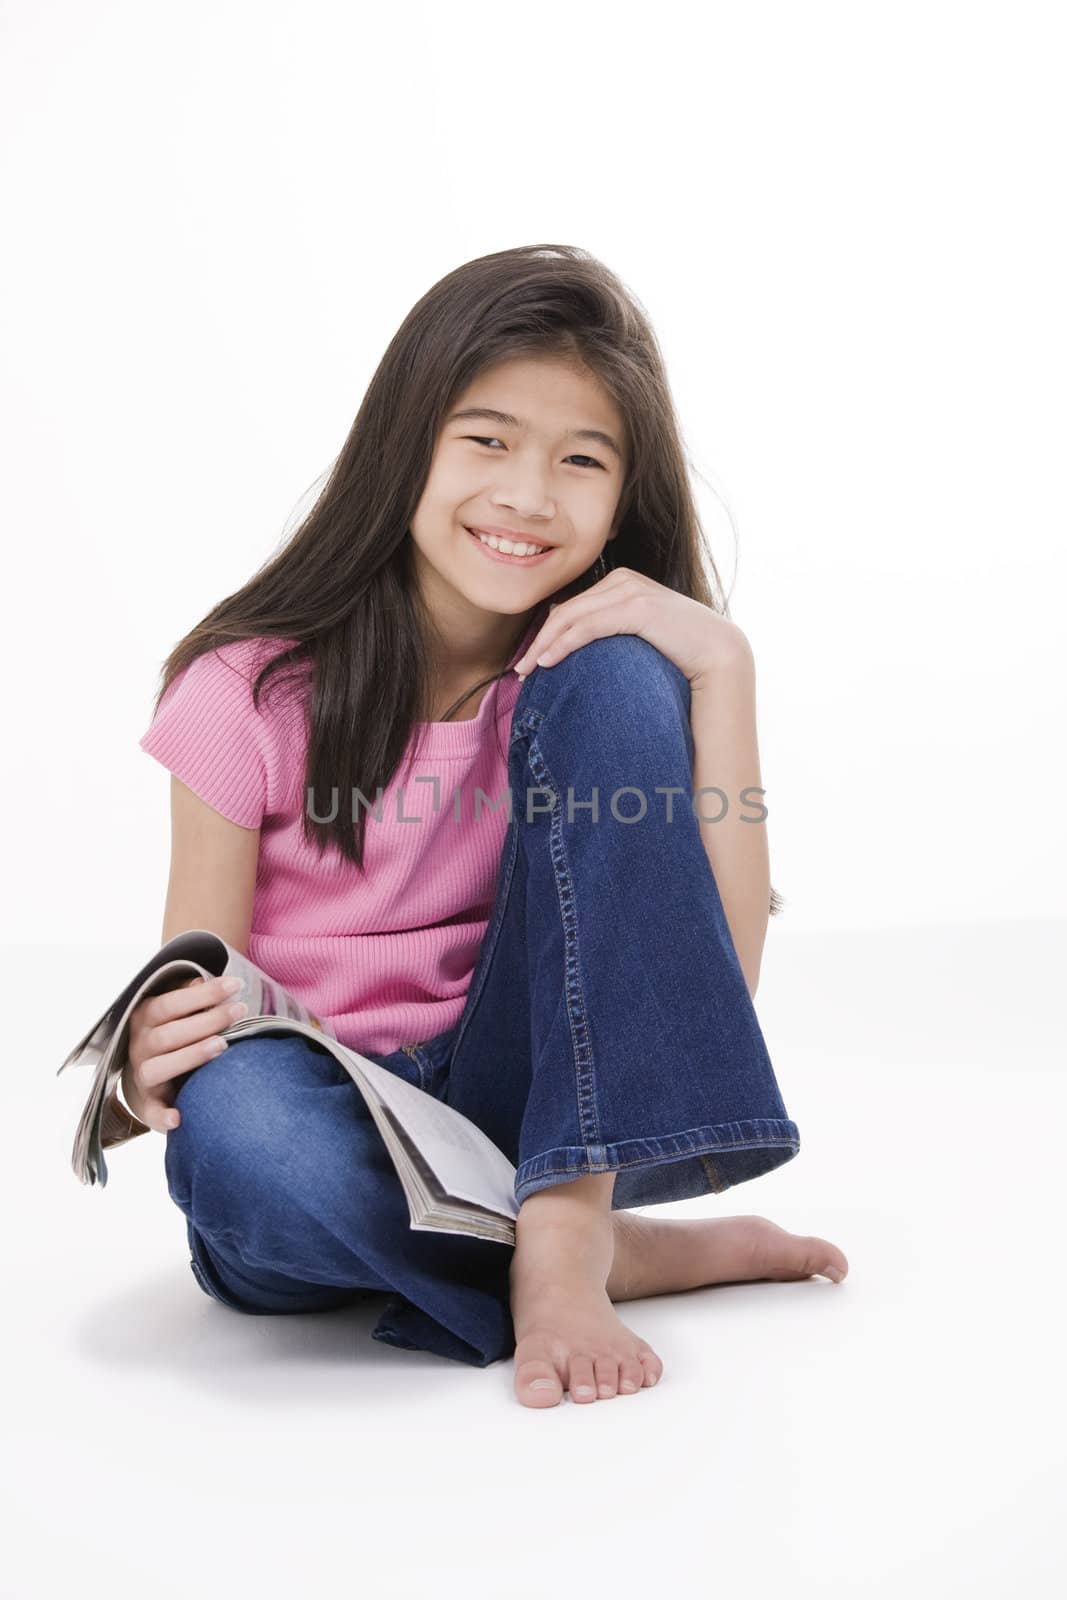 Ten year old Asian girl sitting on floor reading a magazine, isolated on white